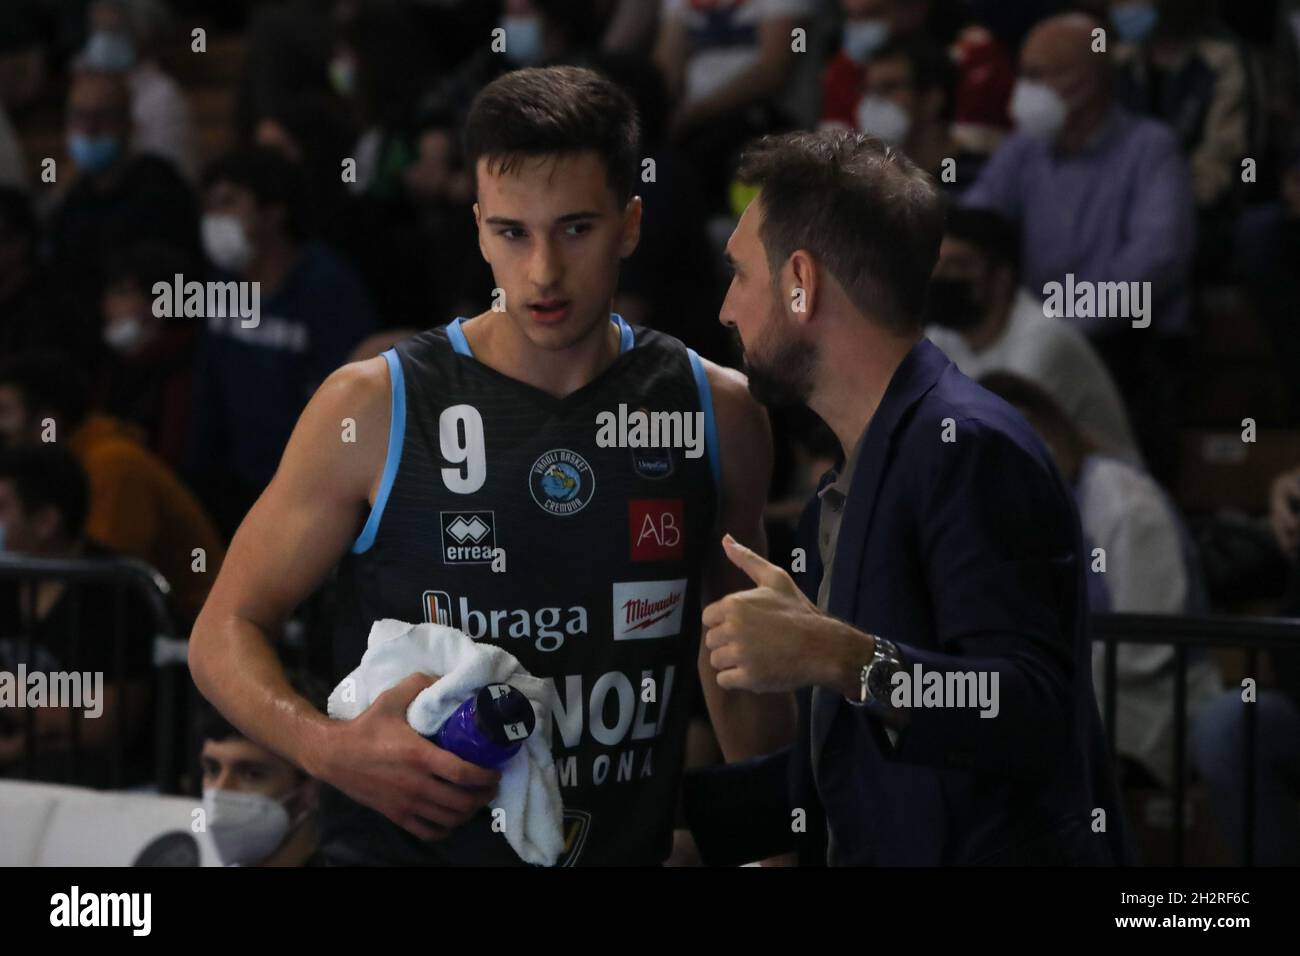 Cremona, Italy. 23rd Oct, 2021. Spagnolo Matteo (Vanoli Cremona) spaking with Poeta Giuseppe in banch during Vanoli Basket Cremona vs Happy Casa Brindisi, Italian Basketball A Serie Championship in Cremona, Italy, October 23 2021 Credit: Independent Photo Agency/Alamy Live News Stock Photo